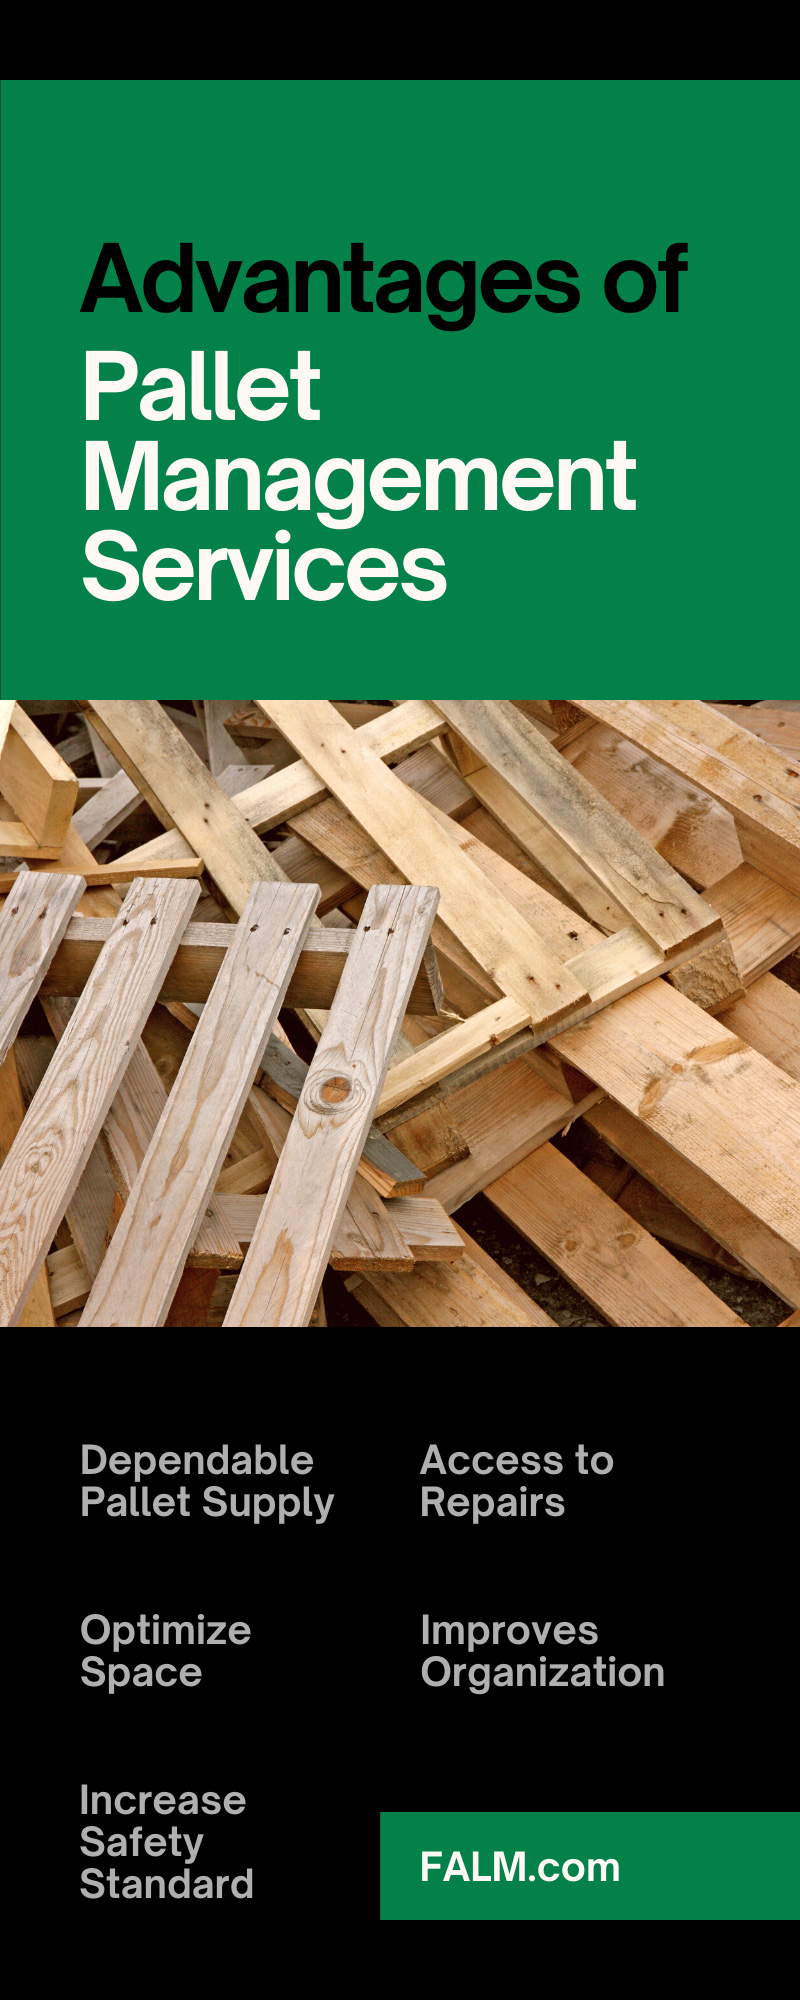 The Benefits of Pallet Management Services